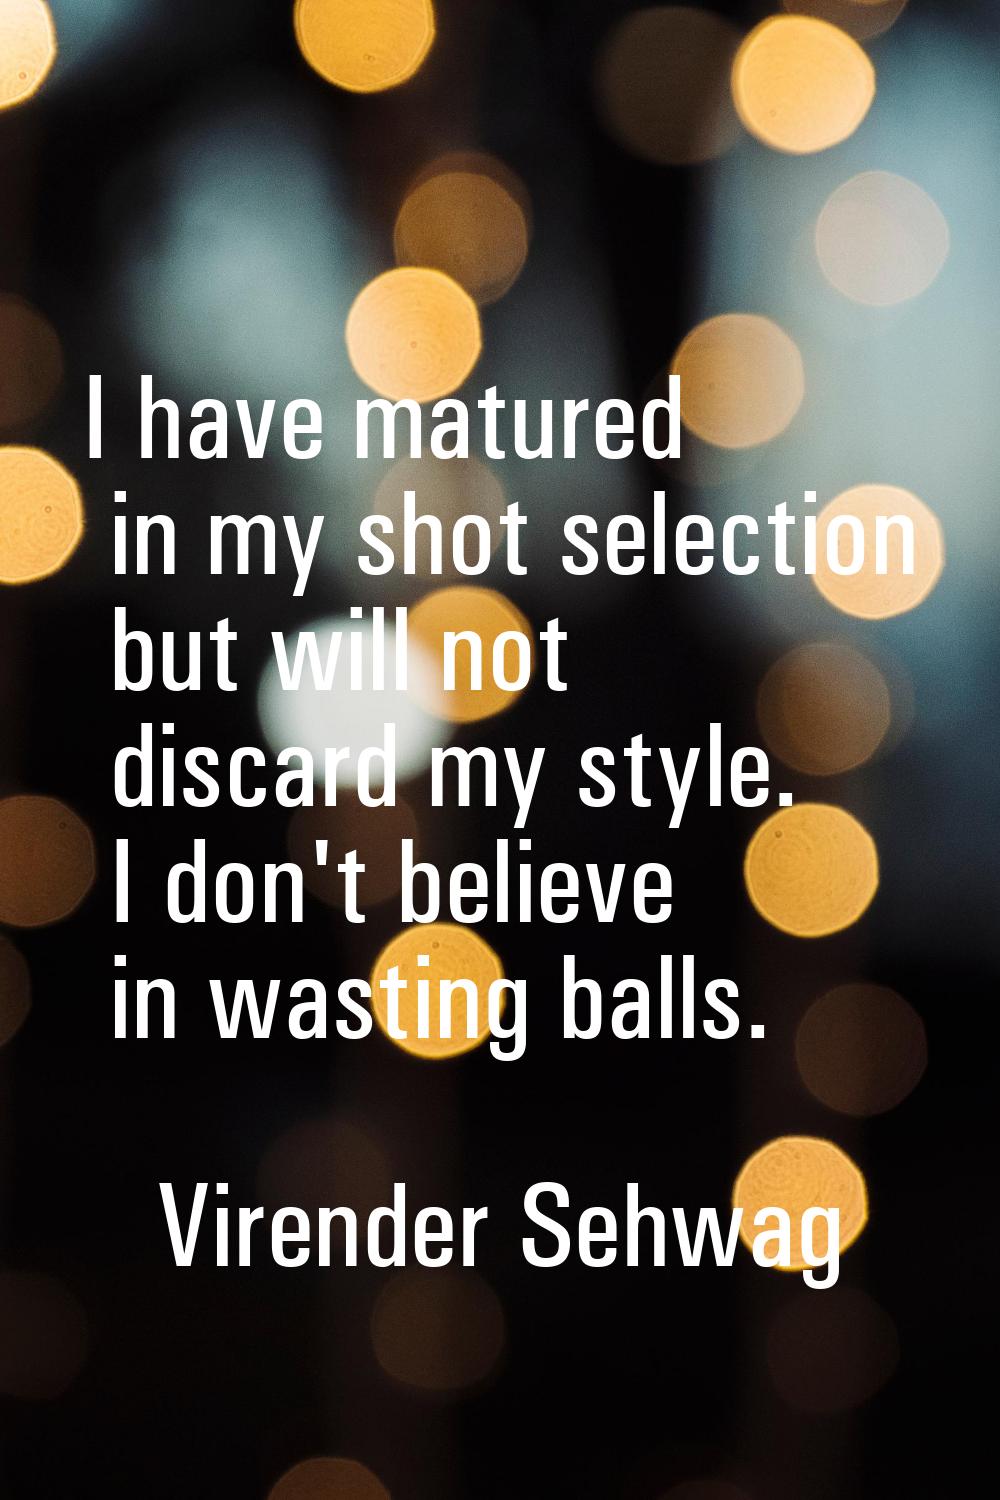 I have matured in my shot selection but will not discard my style. I don't believe in wasting balls